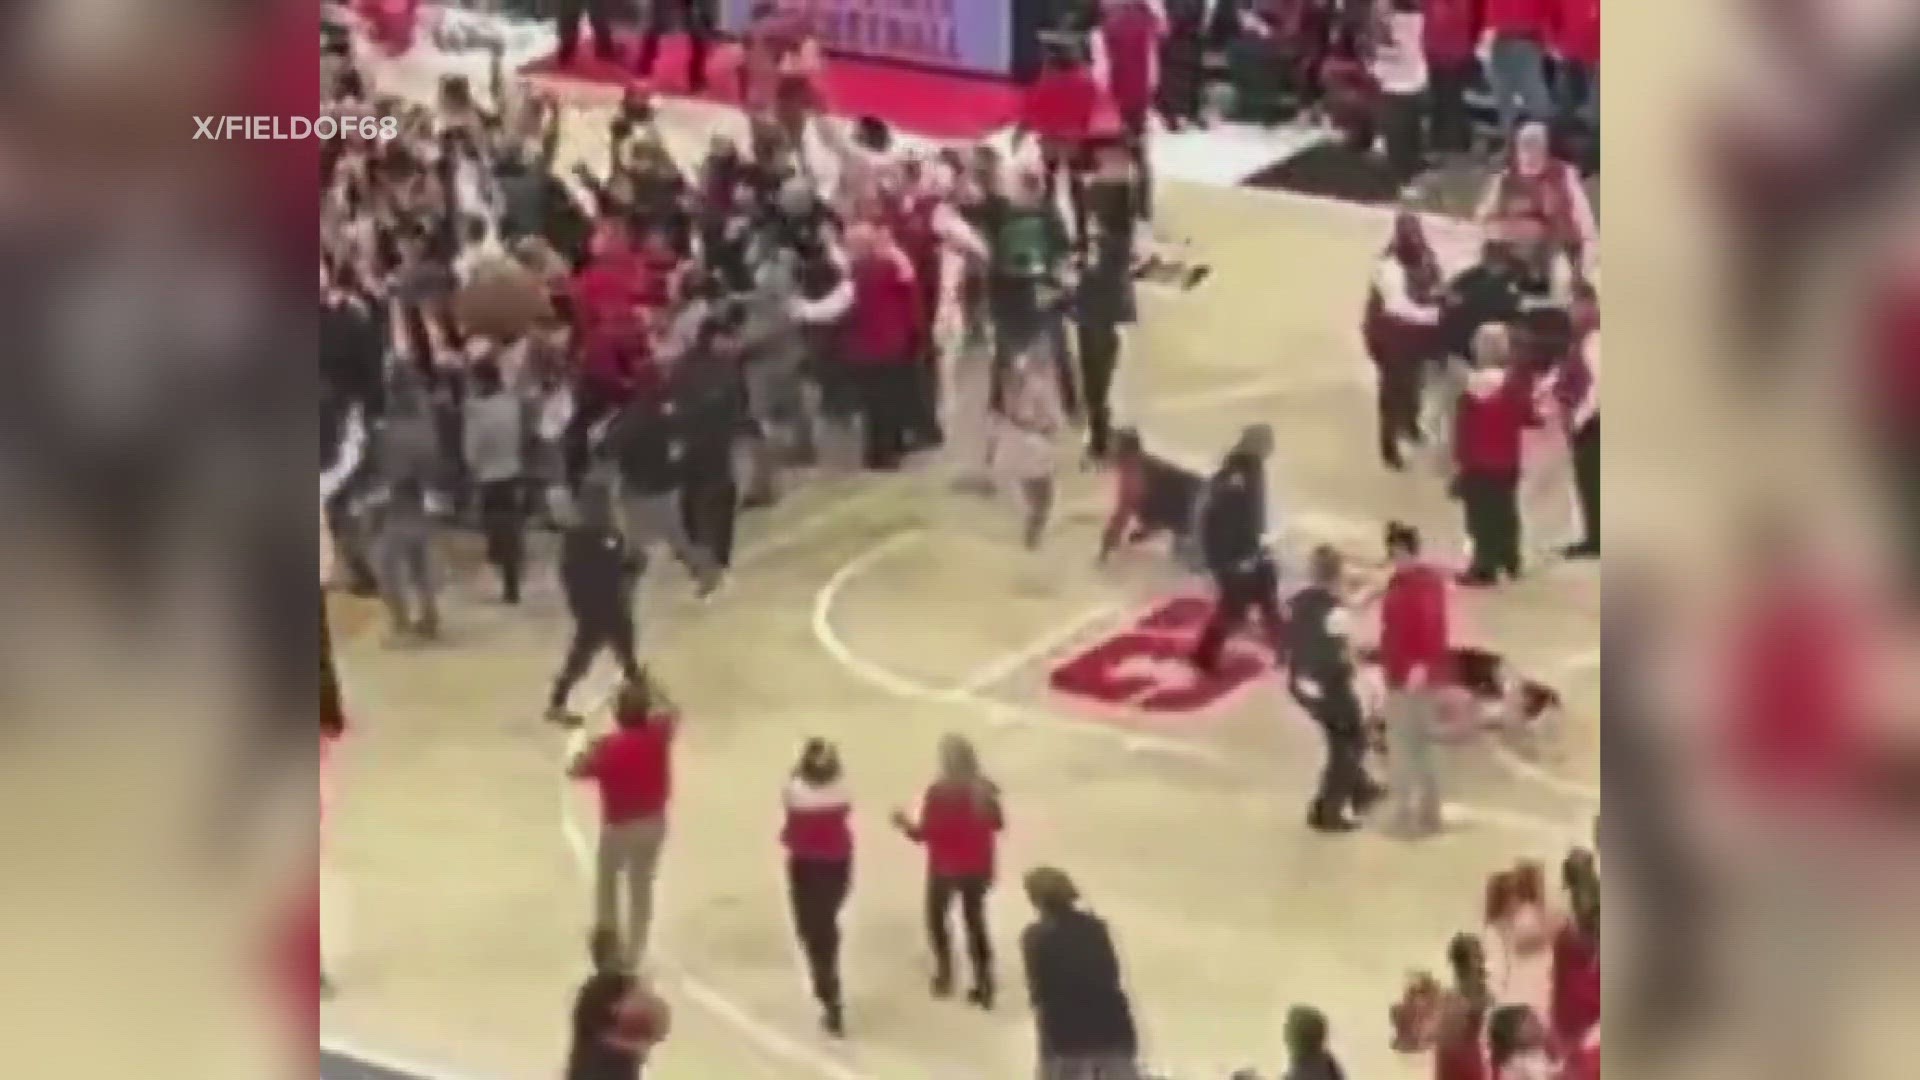 Caitlin Clark said she was “OK” after she was accidently knocked down by a fan running onto the court after No. 2 Iowa was upset by No. 18 Ohio State on Sunday.